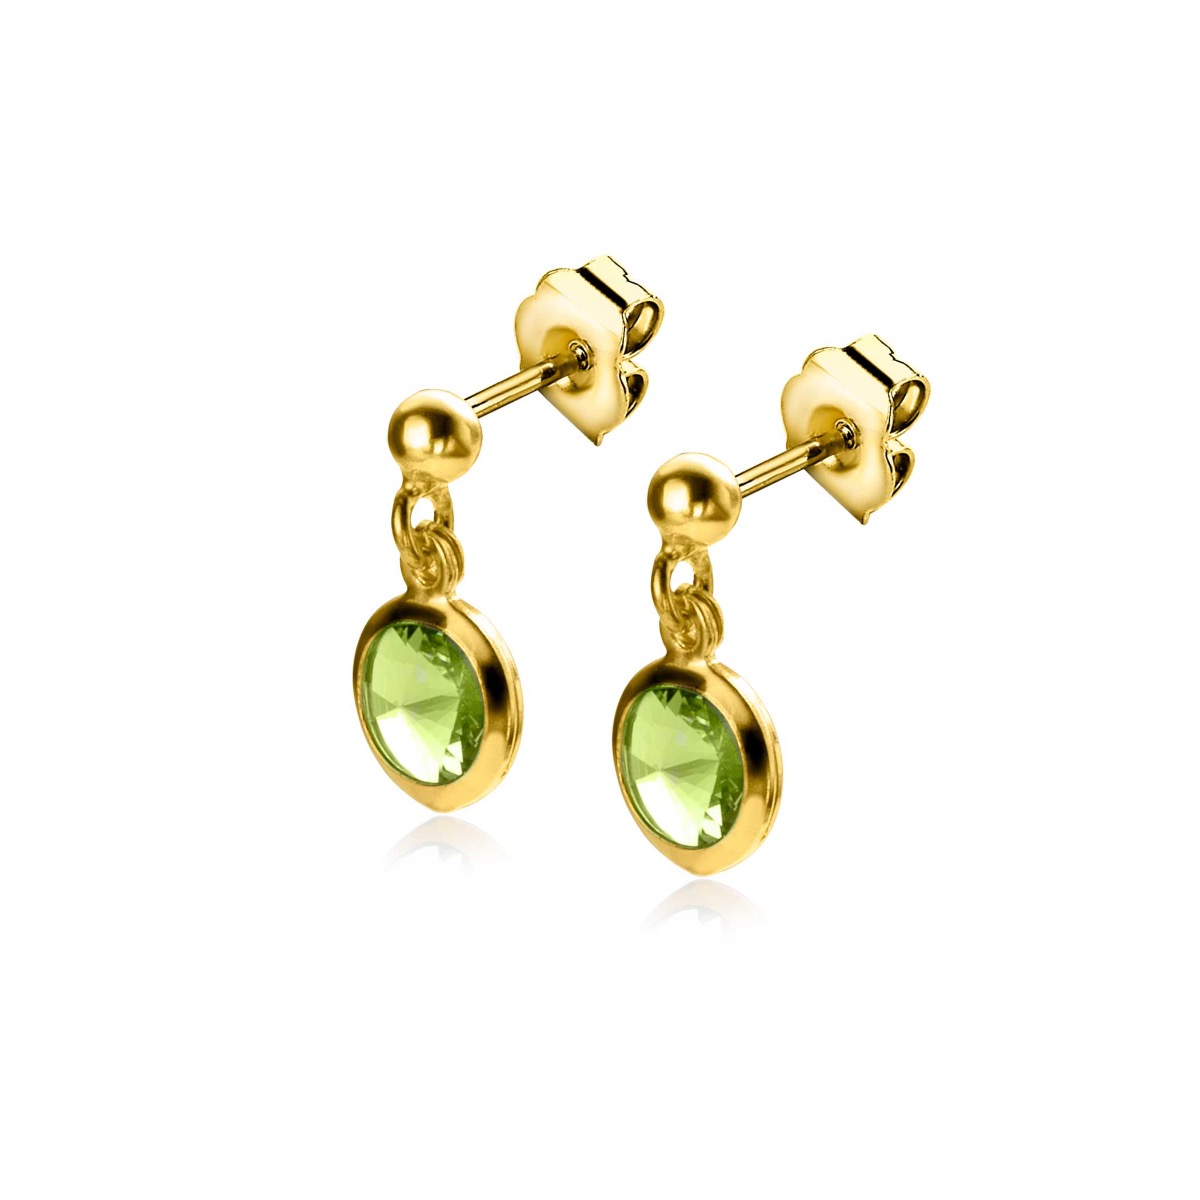 7mm ZINZI Gold Plated Sterling Silver Stud Earrings Bead with Dangling Round Green Swarovski Crystal ZIO2348